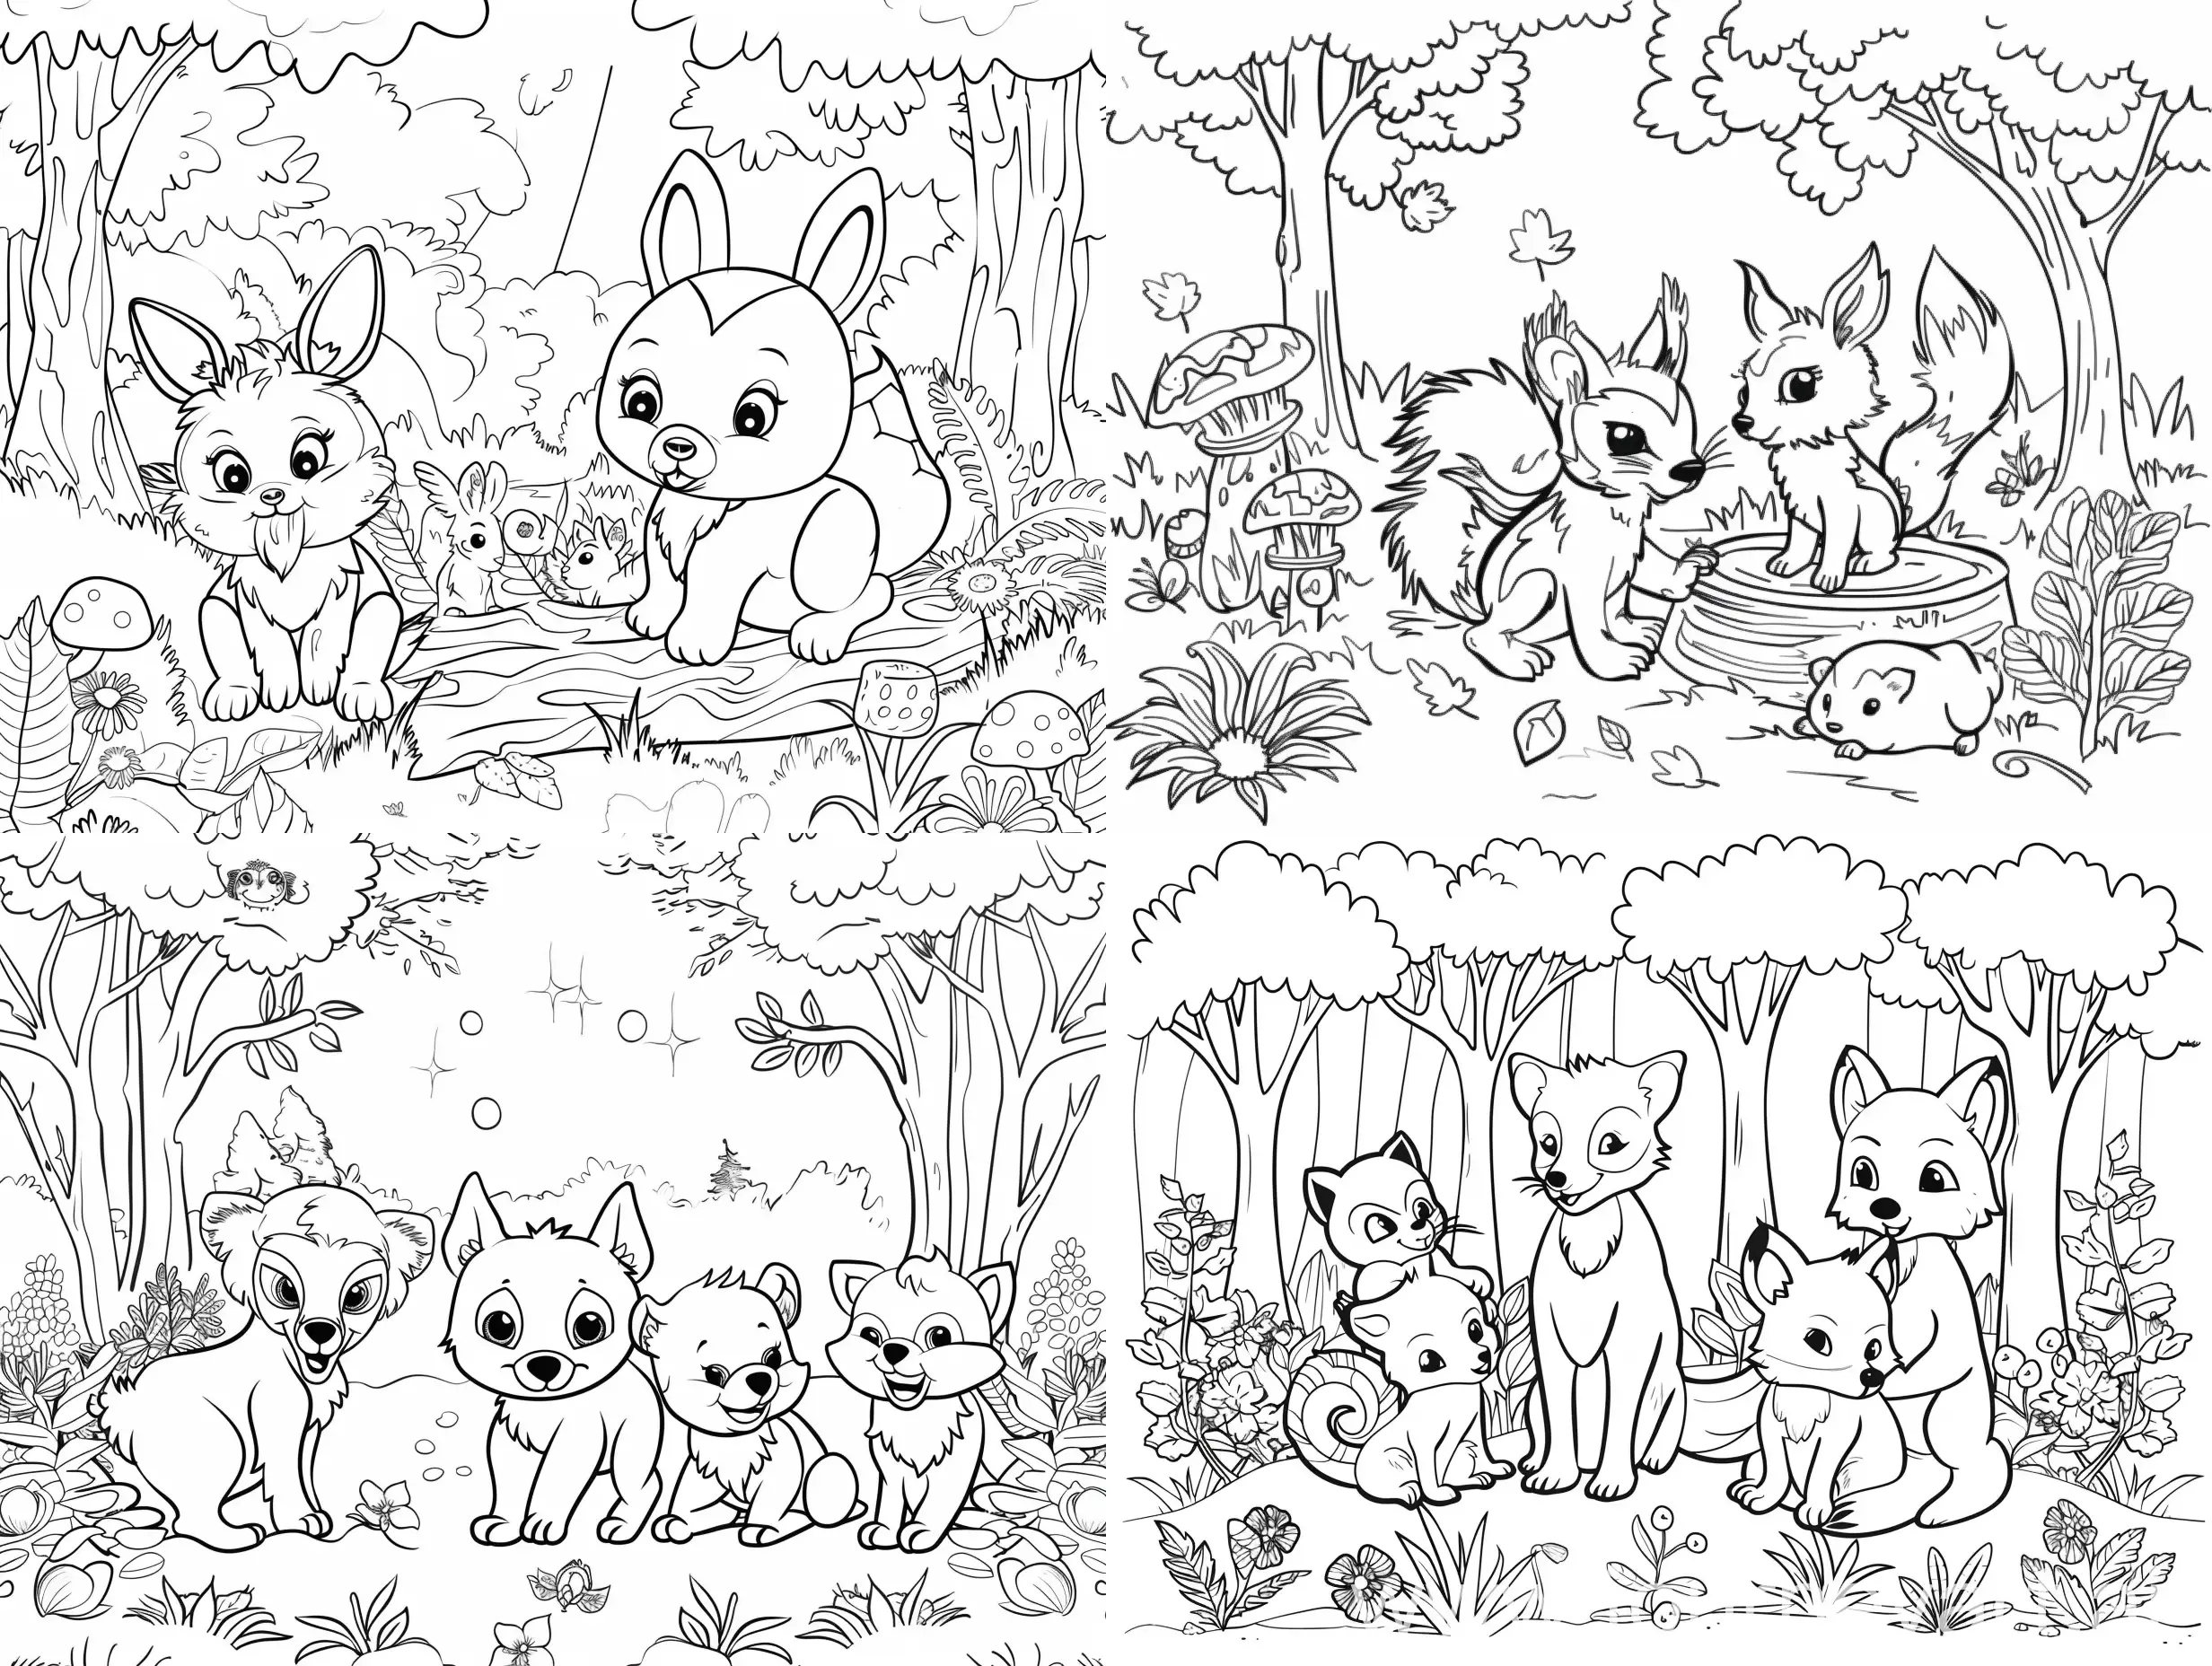 Adorable-Forest-Animals-Coloring-Page-for-Relaxation-and-Creativity